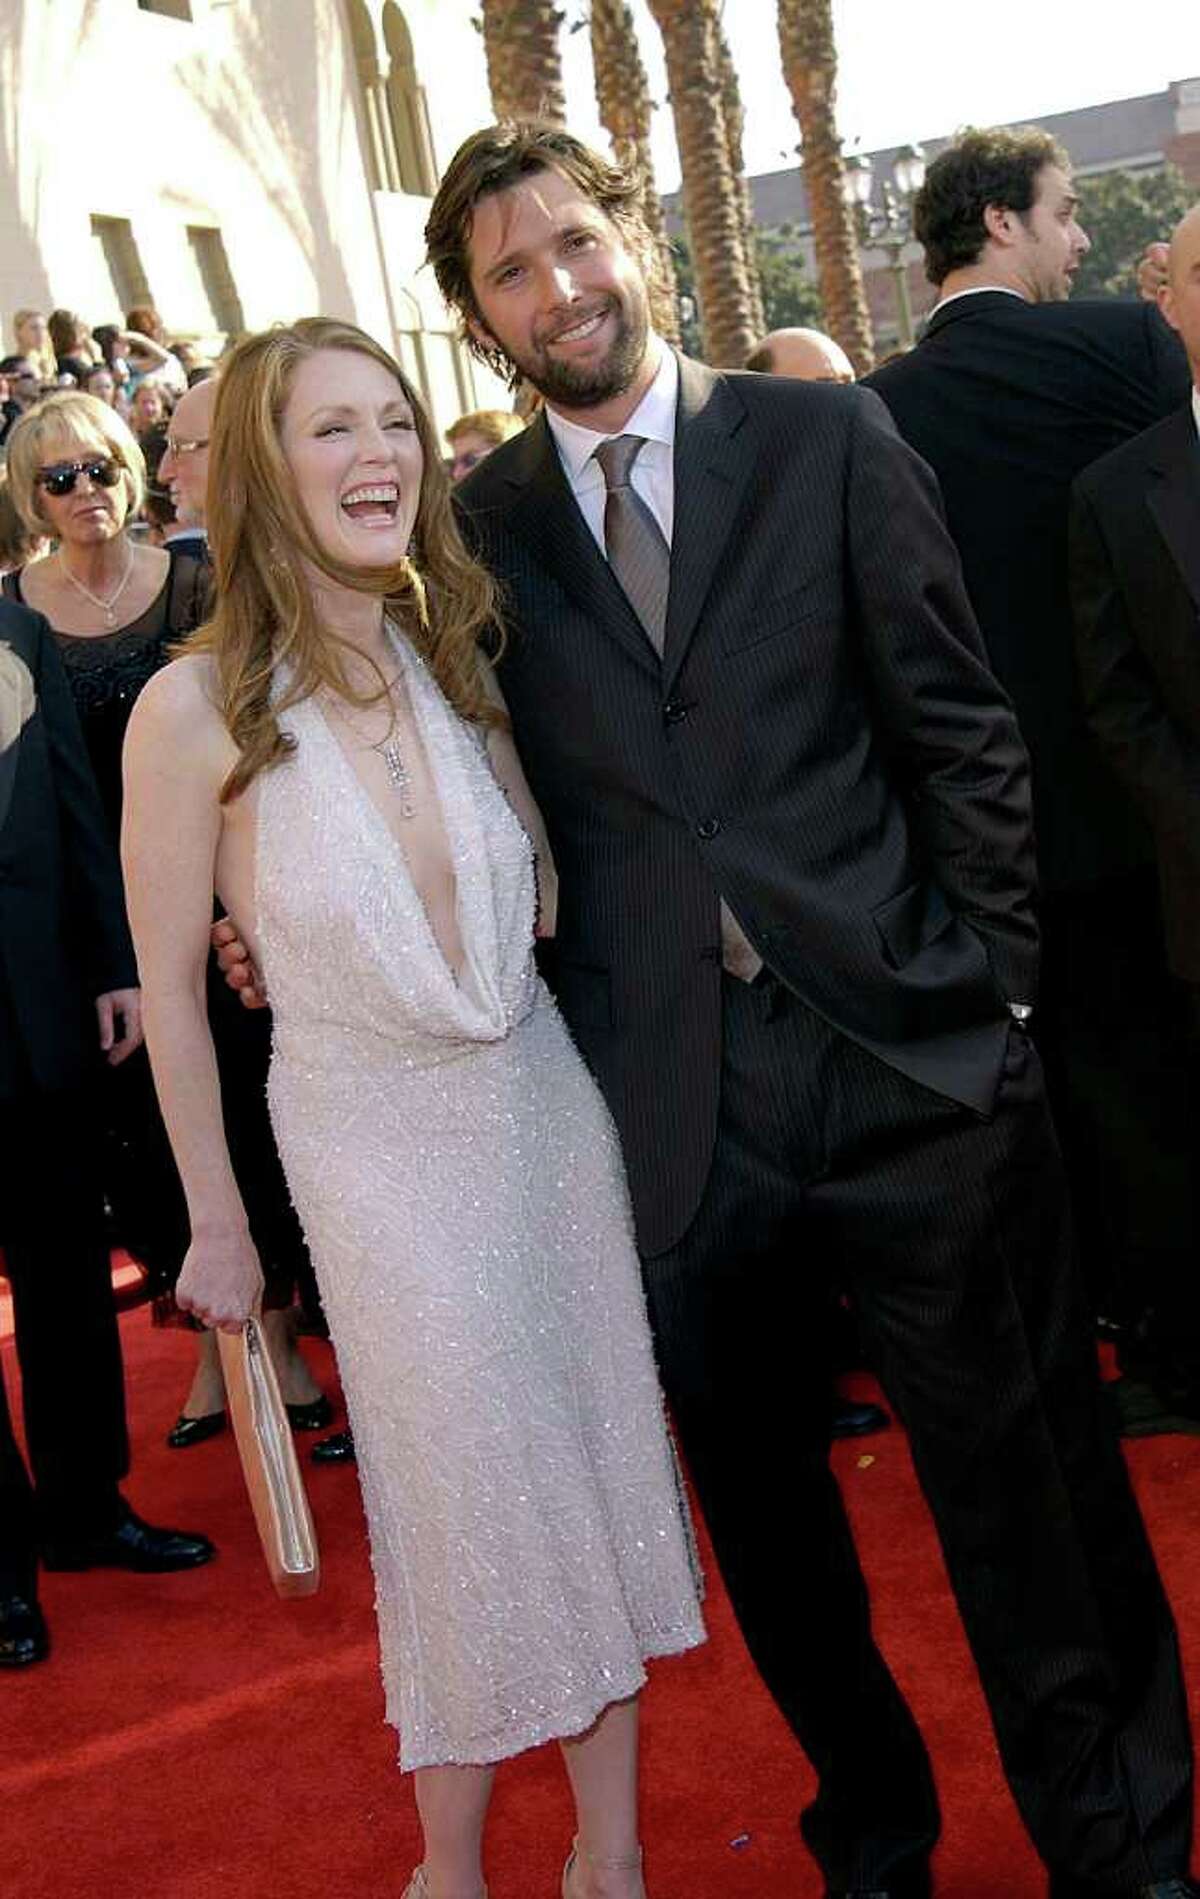 LOS ANGELES - MARCH 9: Actress and nominee Julianne Moore poses with director Bart Freundlich at the 9th Annual Screen Actors Guild Awards at the Shrine Auditorium on March 9, 2003 in Los Angeles, California.